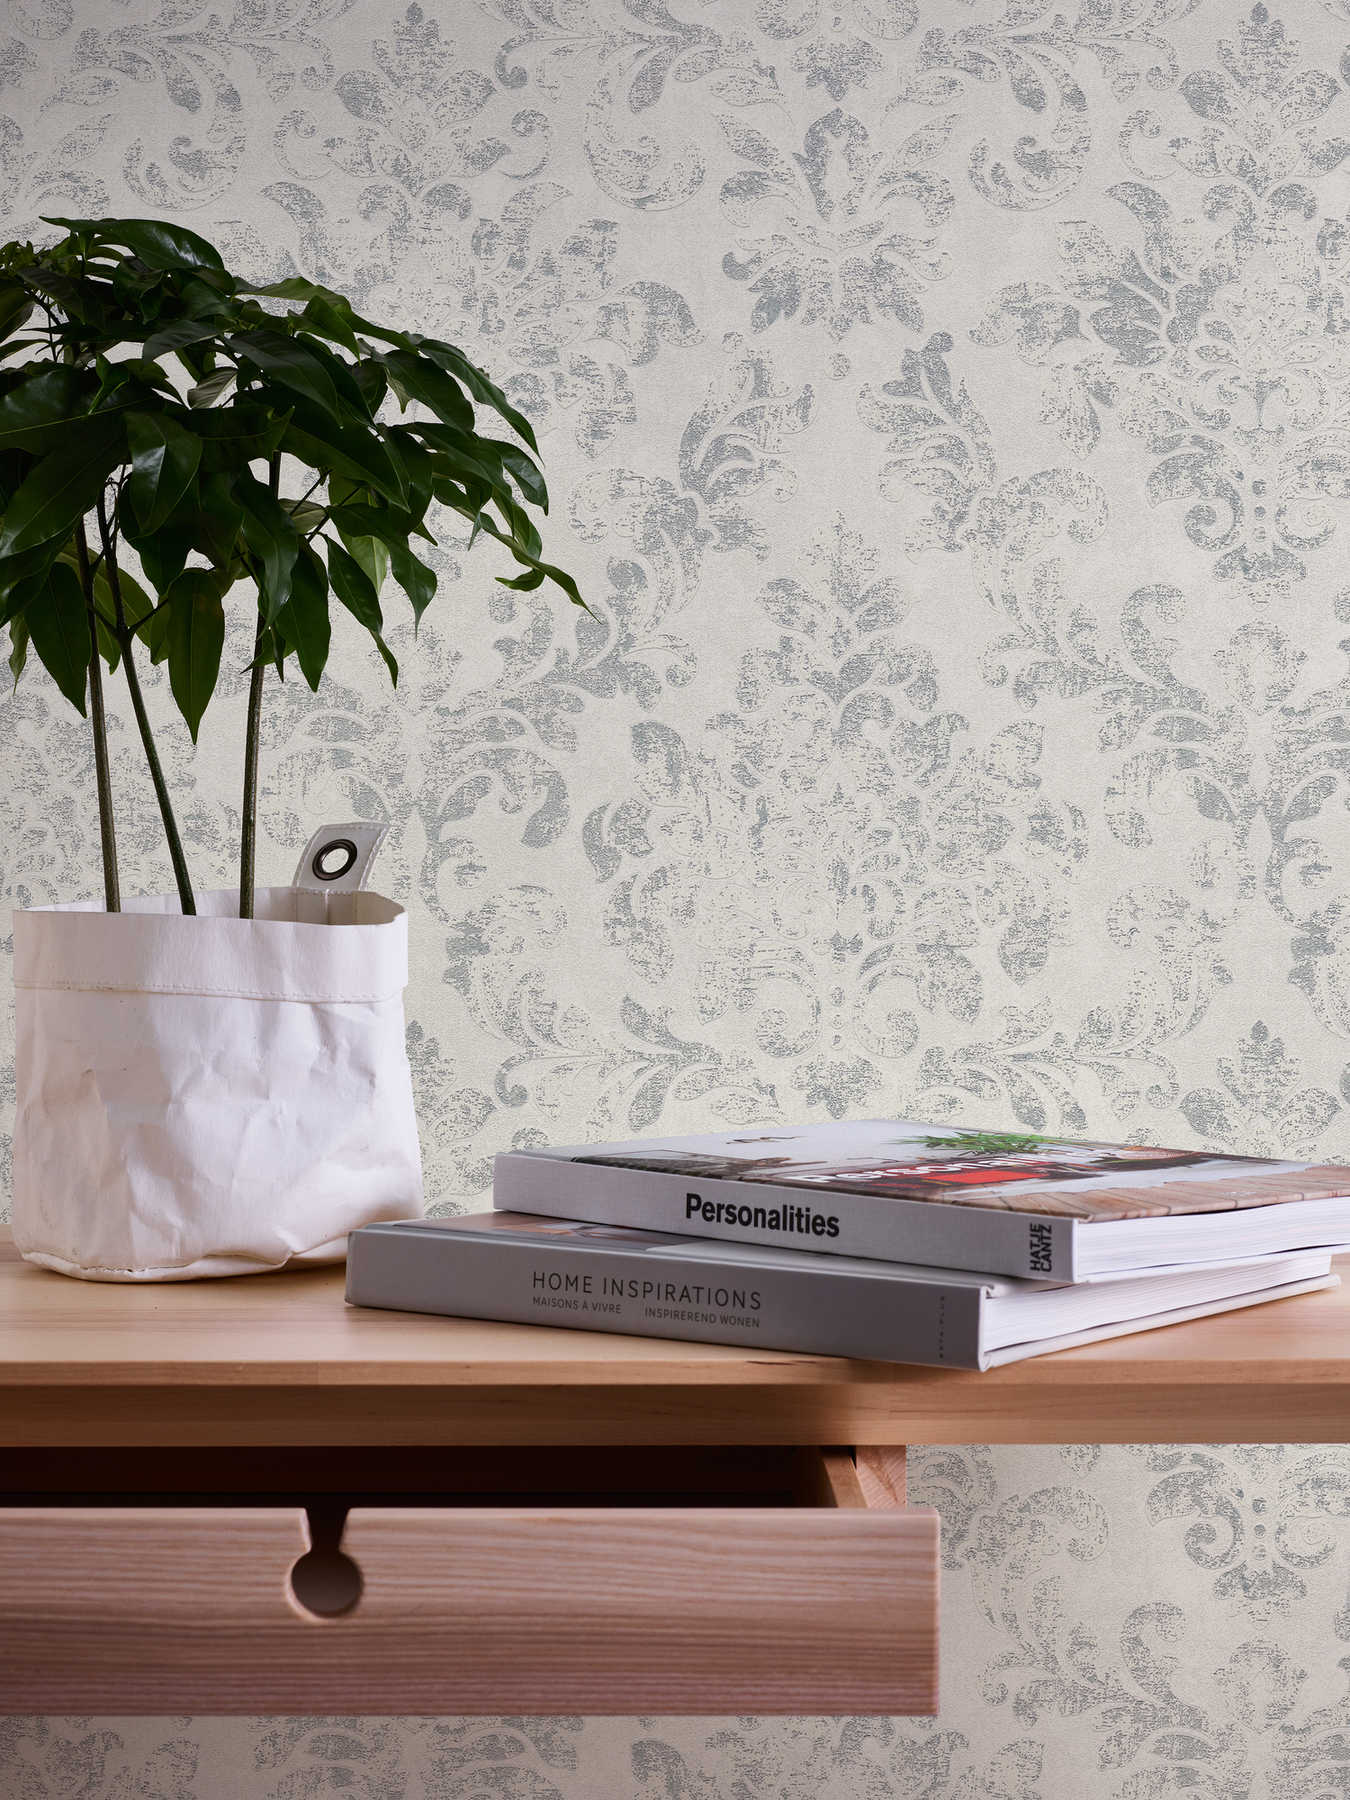             Baroque wallpaper with ornaments in vintage style - grey, silver, white
        